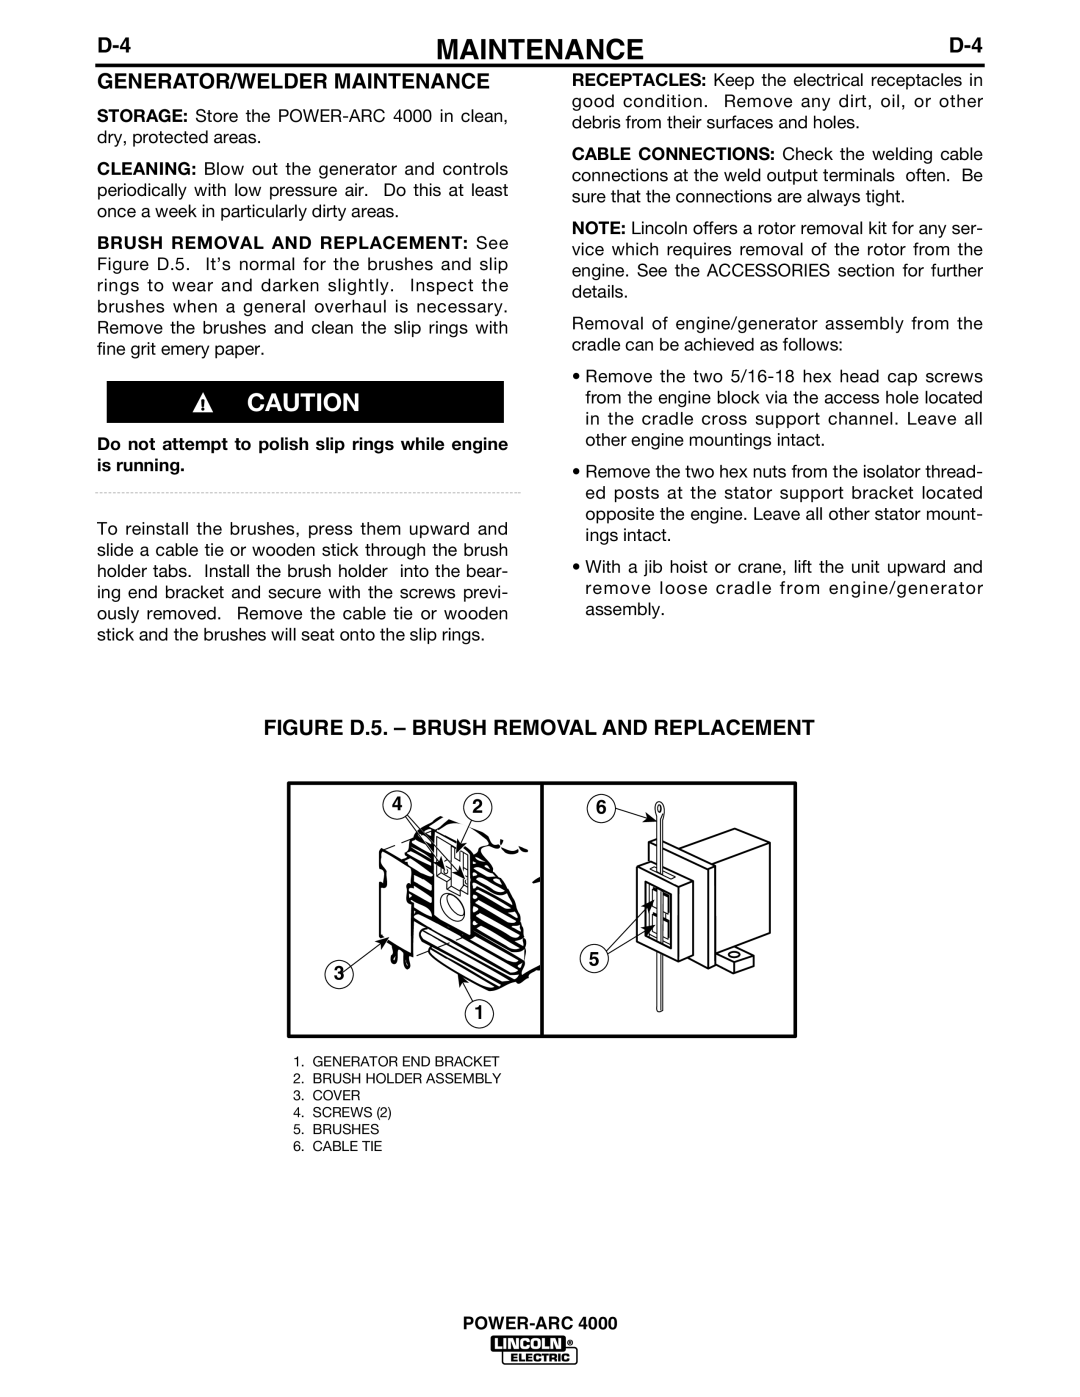 Lincoln POWER-ARC 4000 manual Generator/Welder Maintenance, FIGURE D.5. - BRUSH REMOVAL AND REPLACEMENT, Power-Arc 